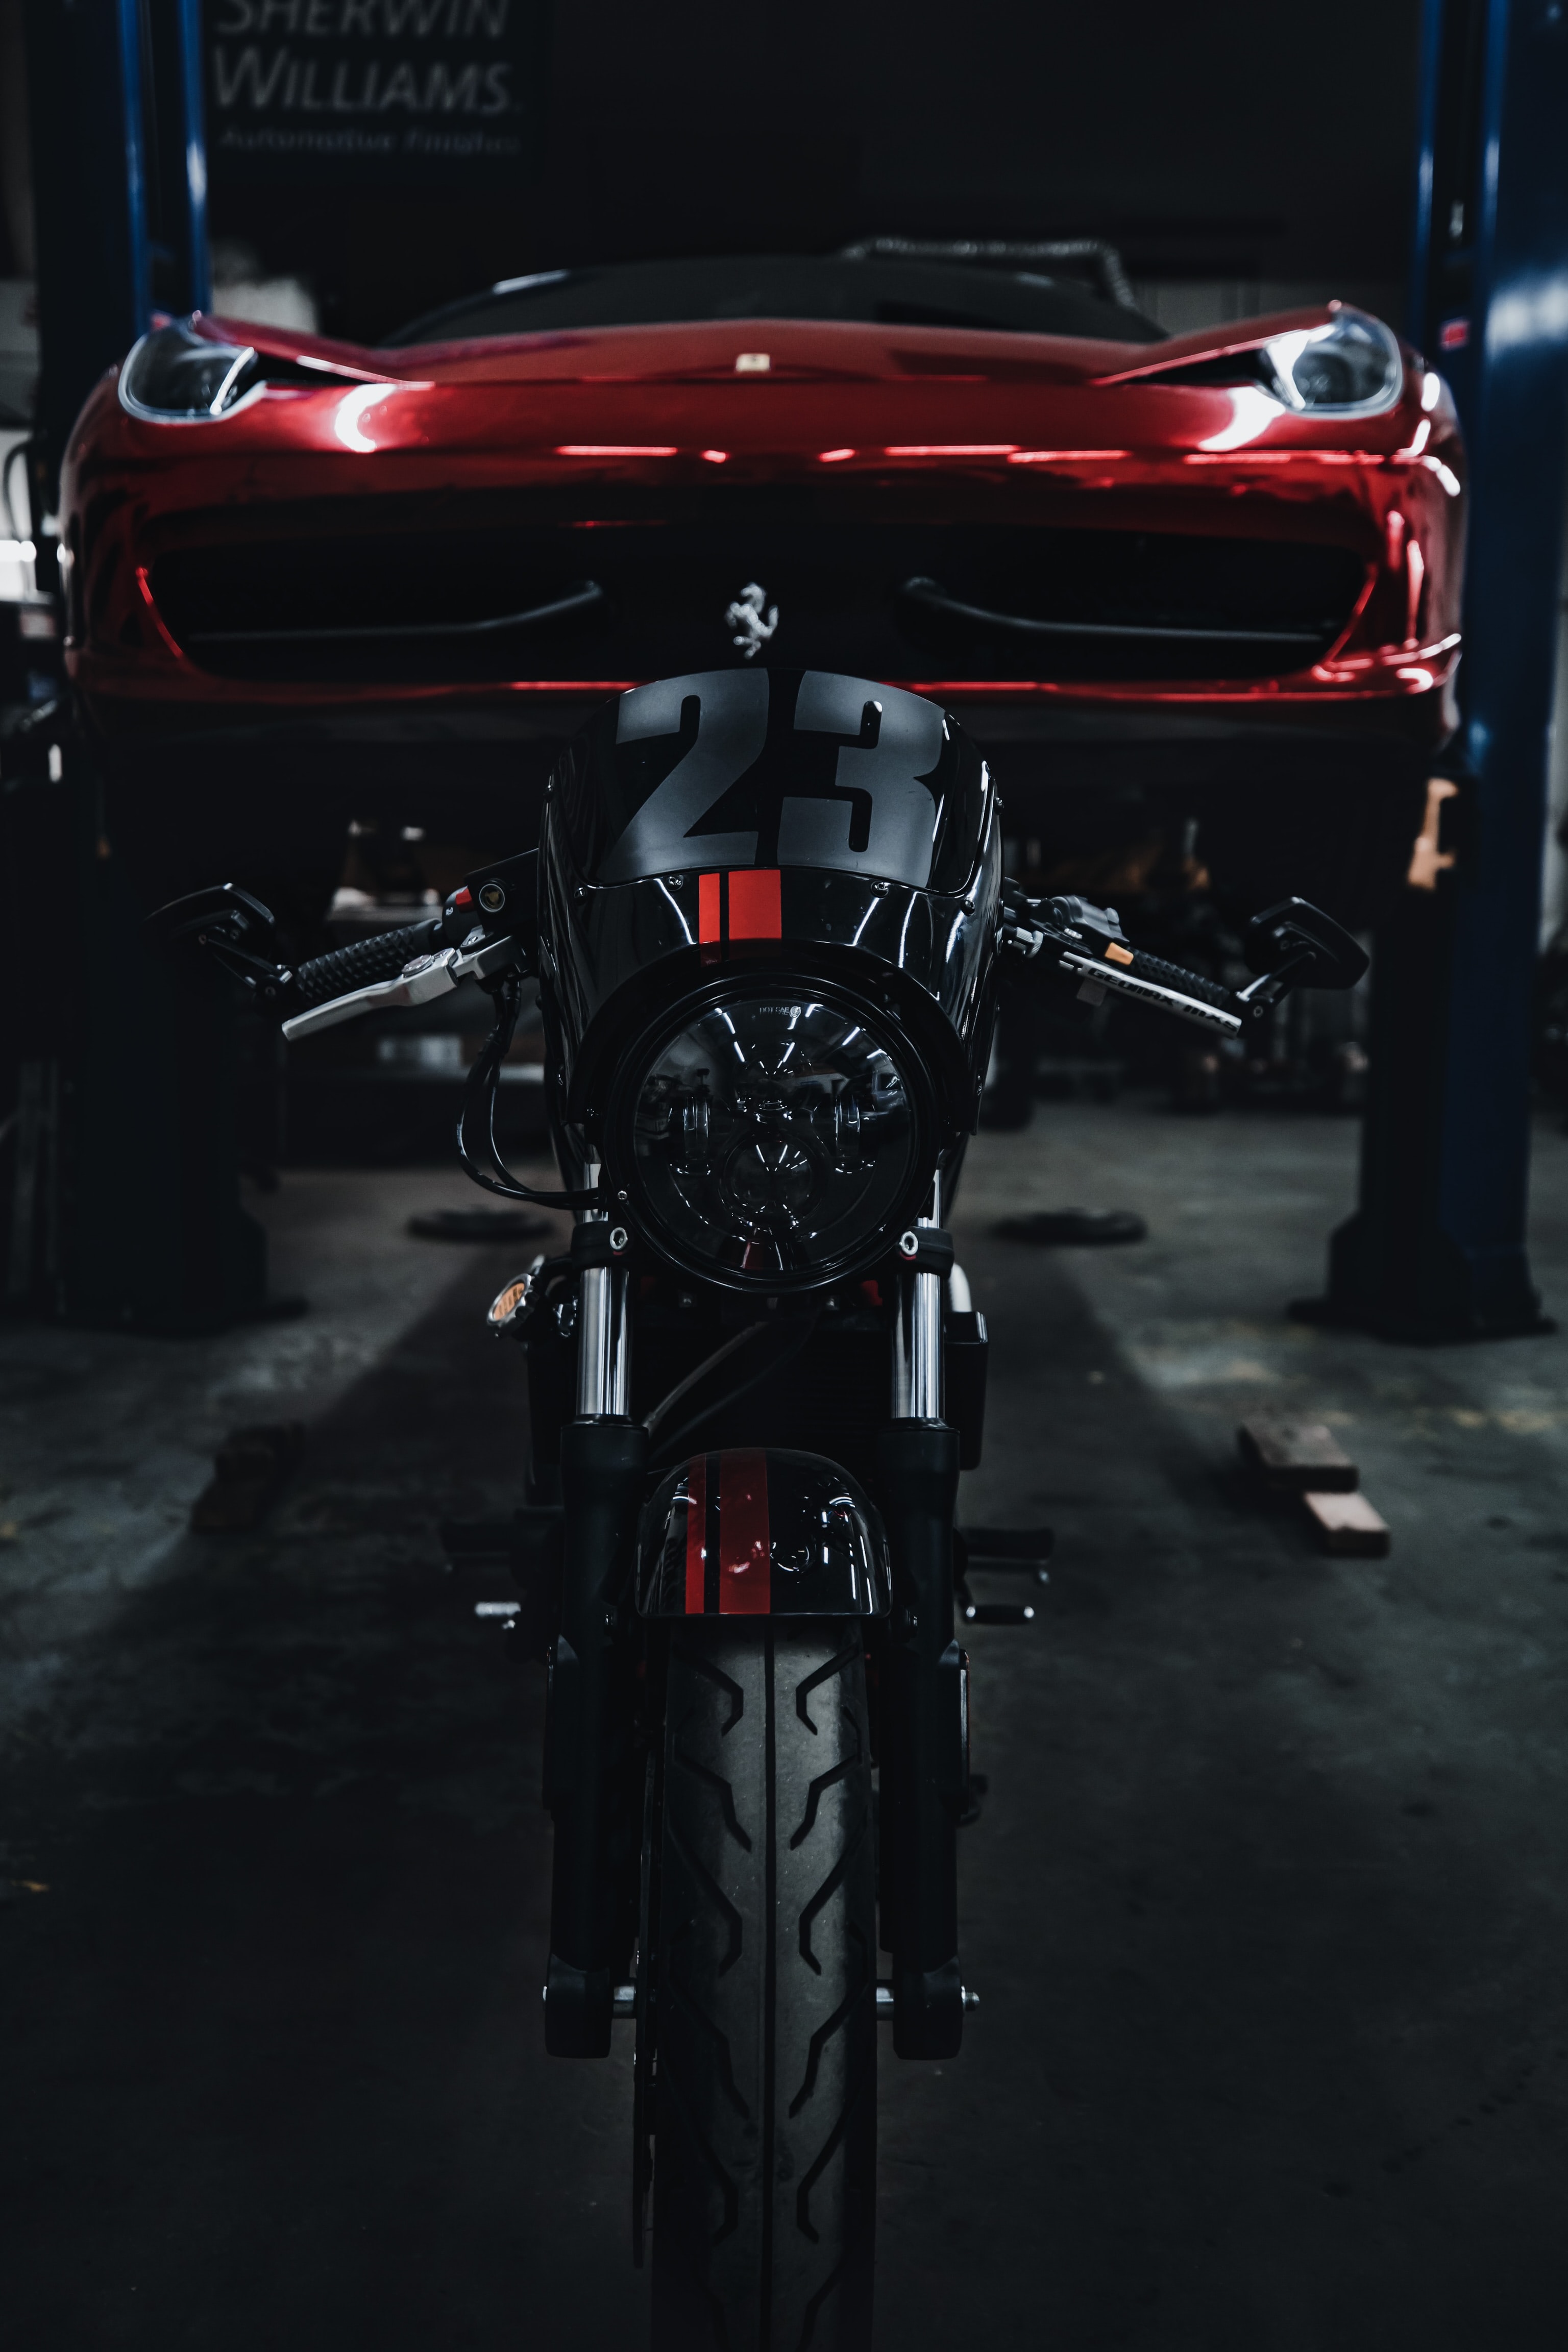 Mobile wallpaper: Motorcycles, Car, Bike, Motorcycle, 97427 download the picture for free